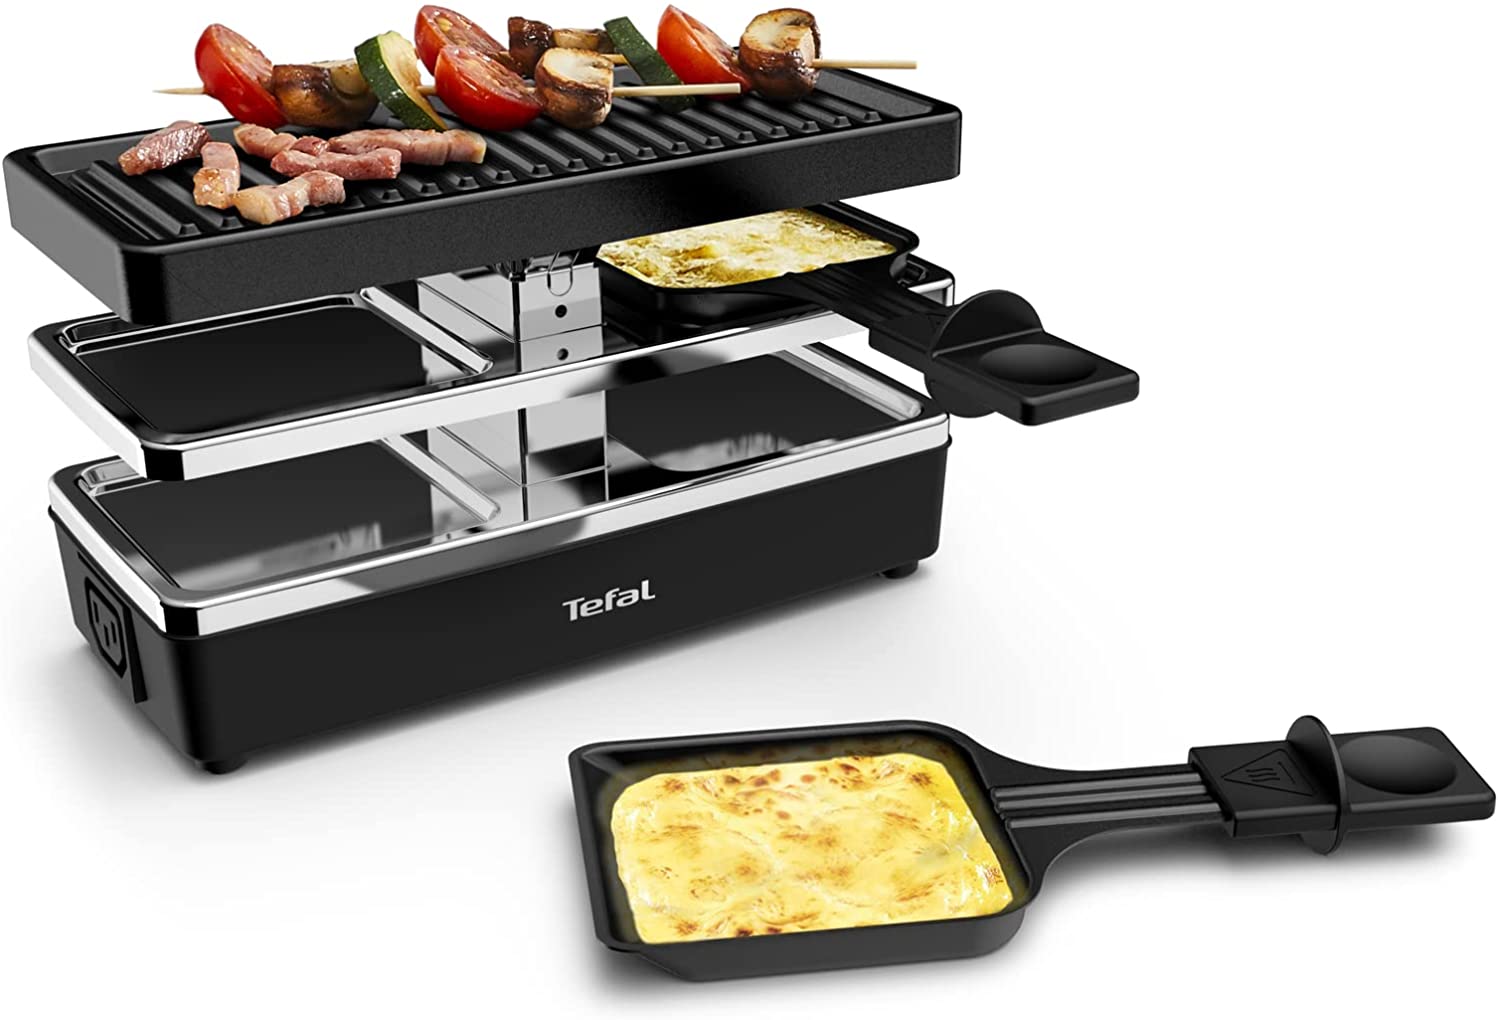 Tefal RE2308 Plug & Share Raclette, 400 Watt, 2 Frying Pans + Grill Plate, On/Off Switch, Non-Stick Coating, Expandable up to 5 Devices, Removable Cable, Easy to Clean, Black/Silver